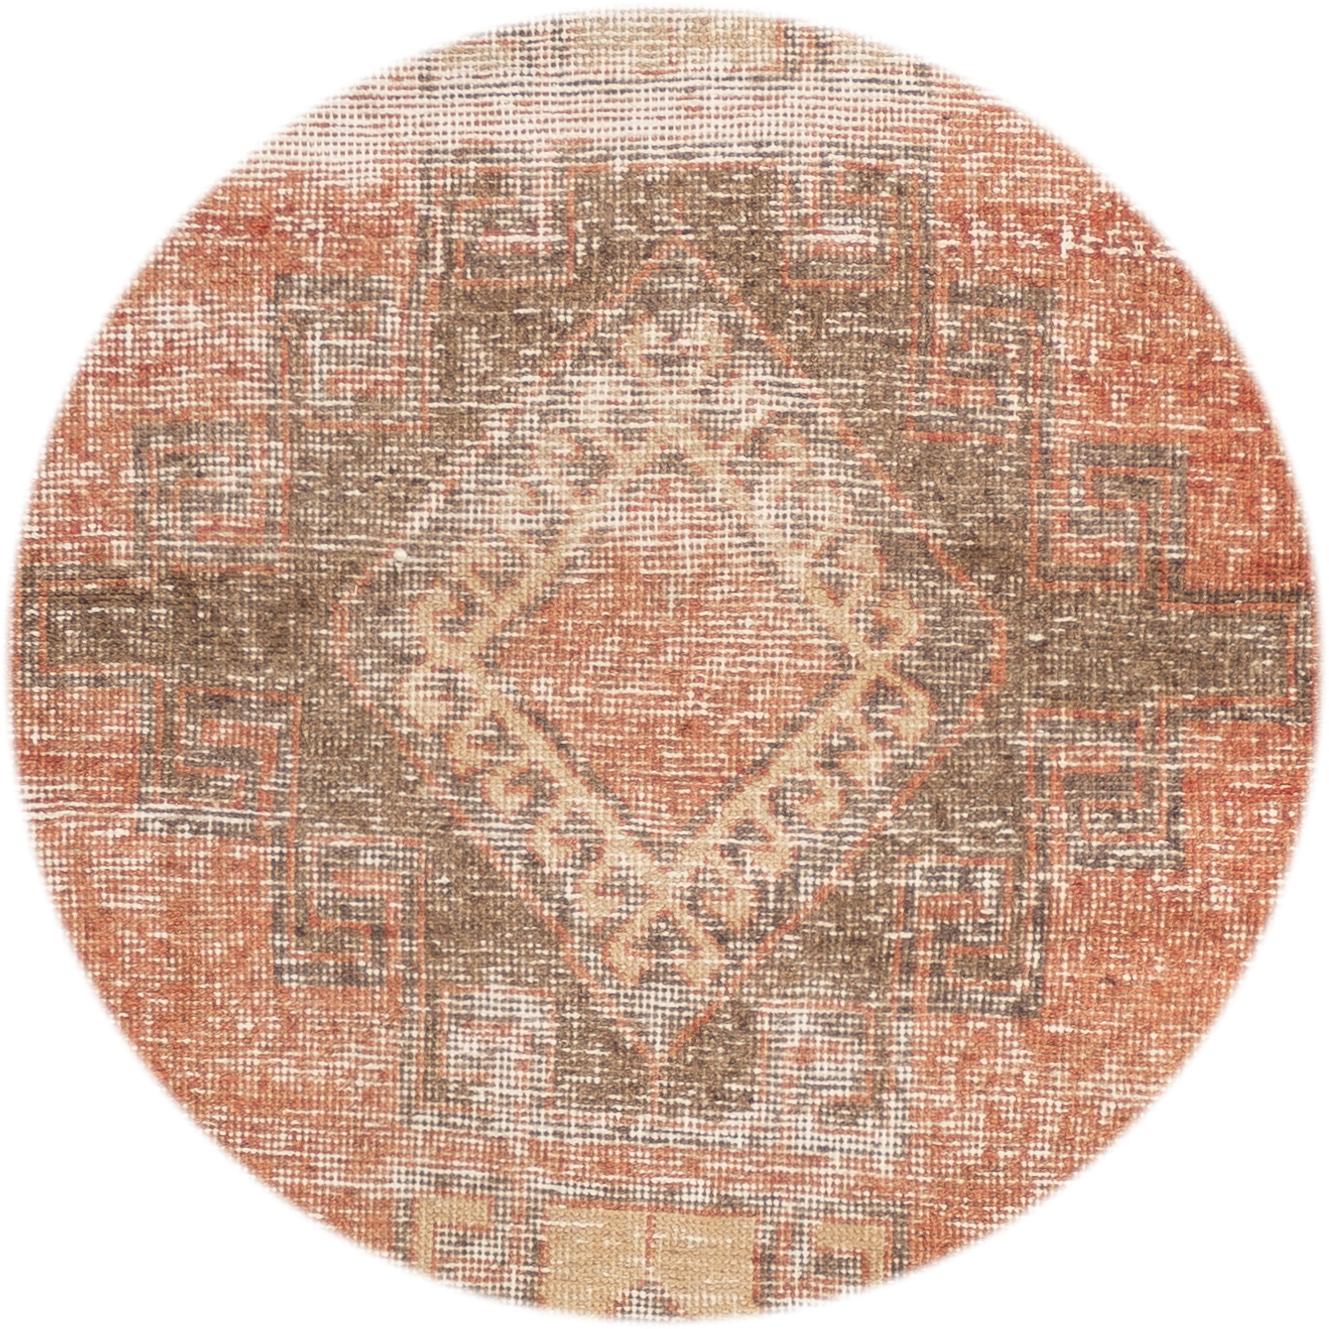 Beautiful antique Turkish Anatolian Runner rug, hand knotted wool with a peach-orange field, brown and tan accents in all-over multi medallion design.
This rug measures 2' 11